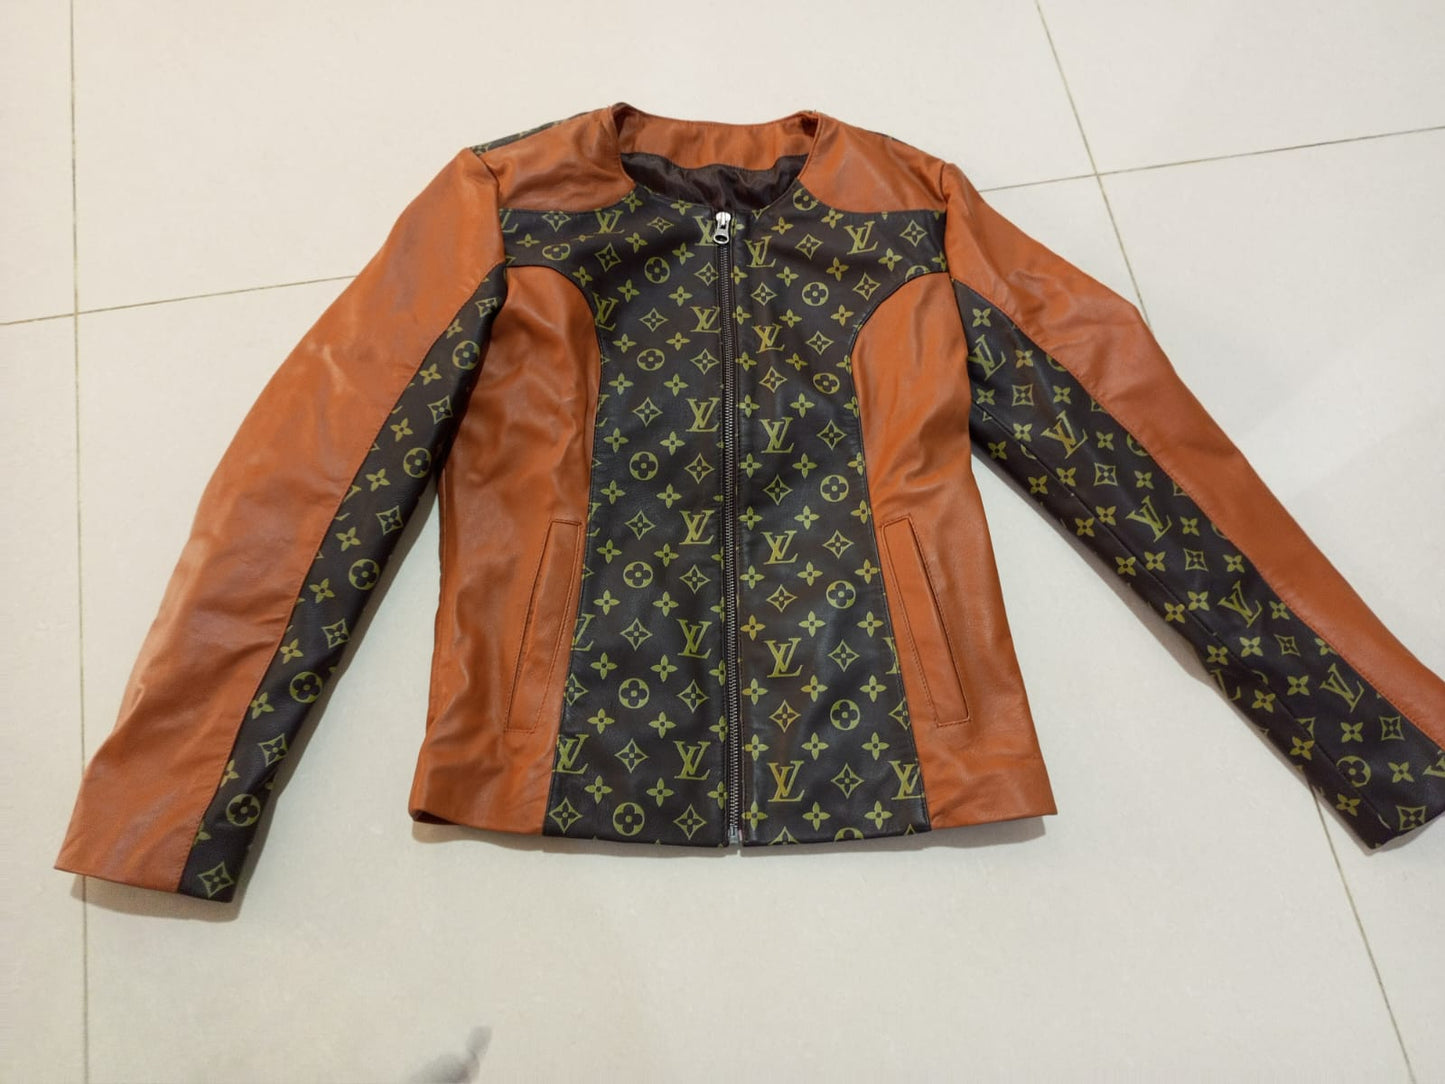 lv leatehr jacket for kid customize jackets for boys winter jacket louis Vuitton jacket for kids custom-made jacket for boys